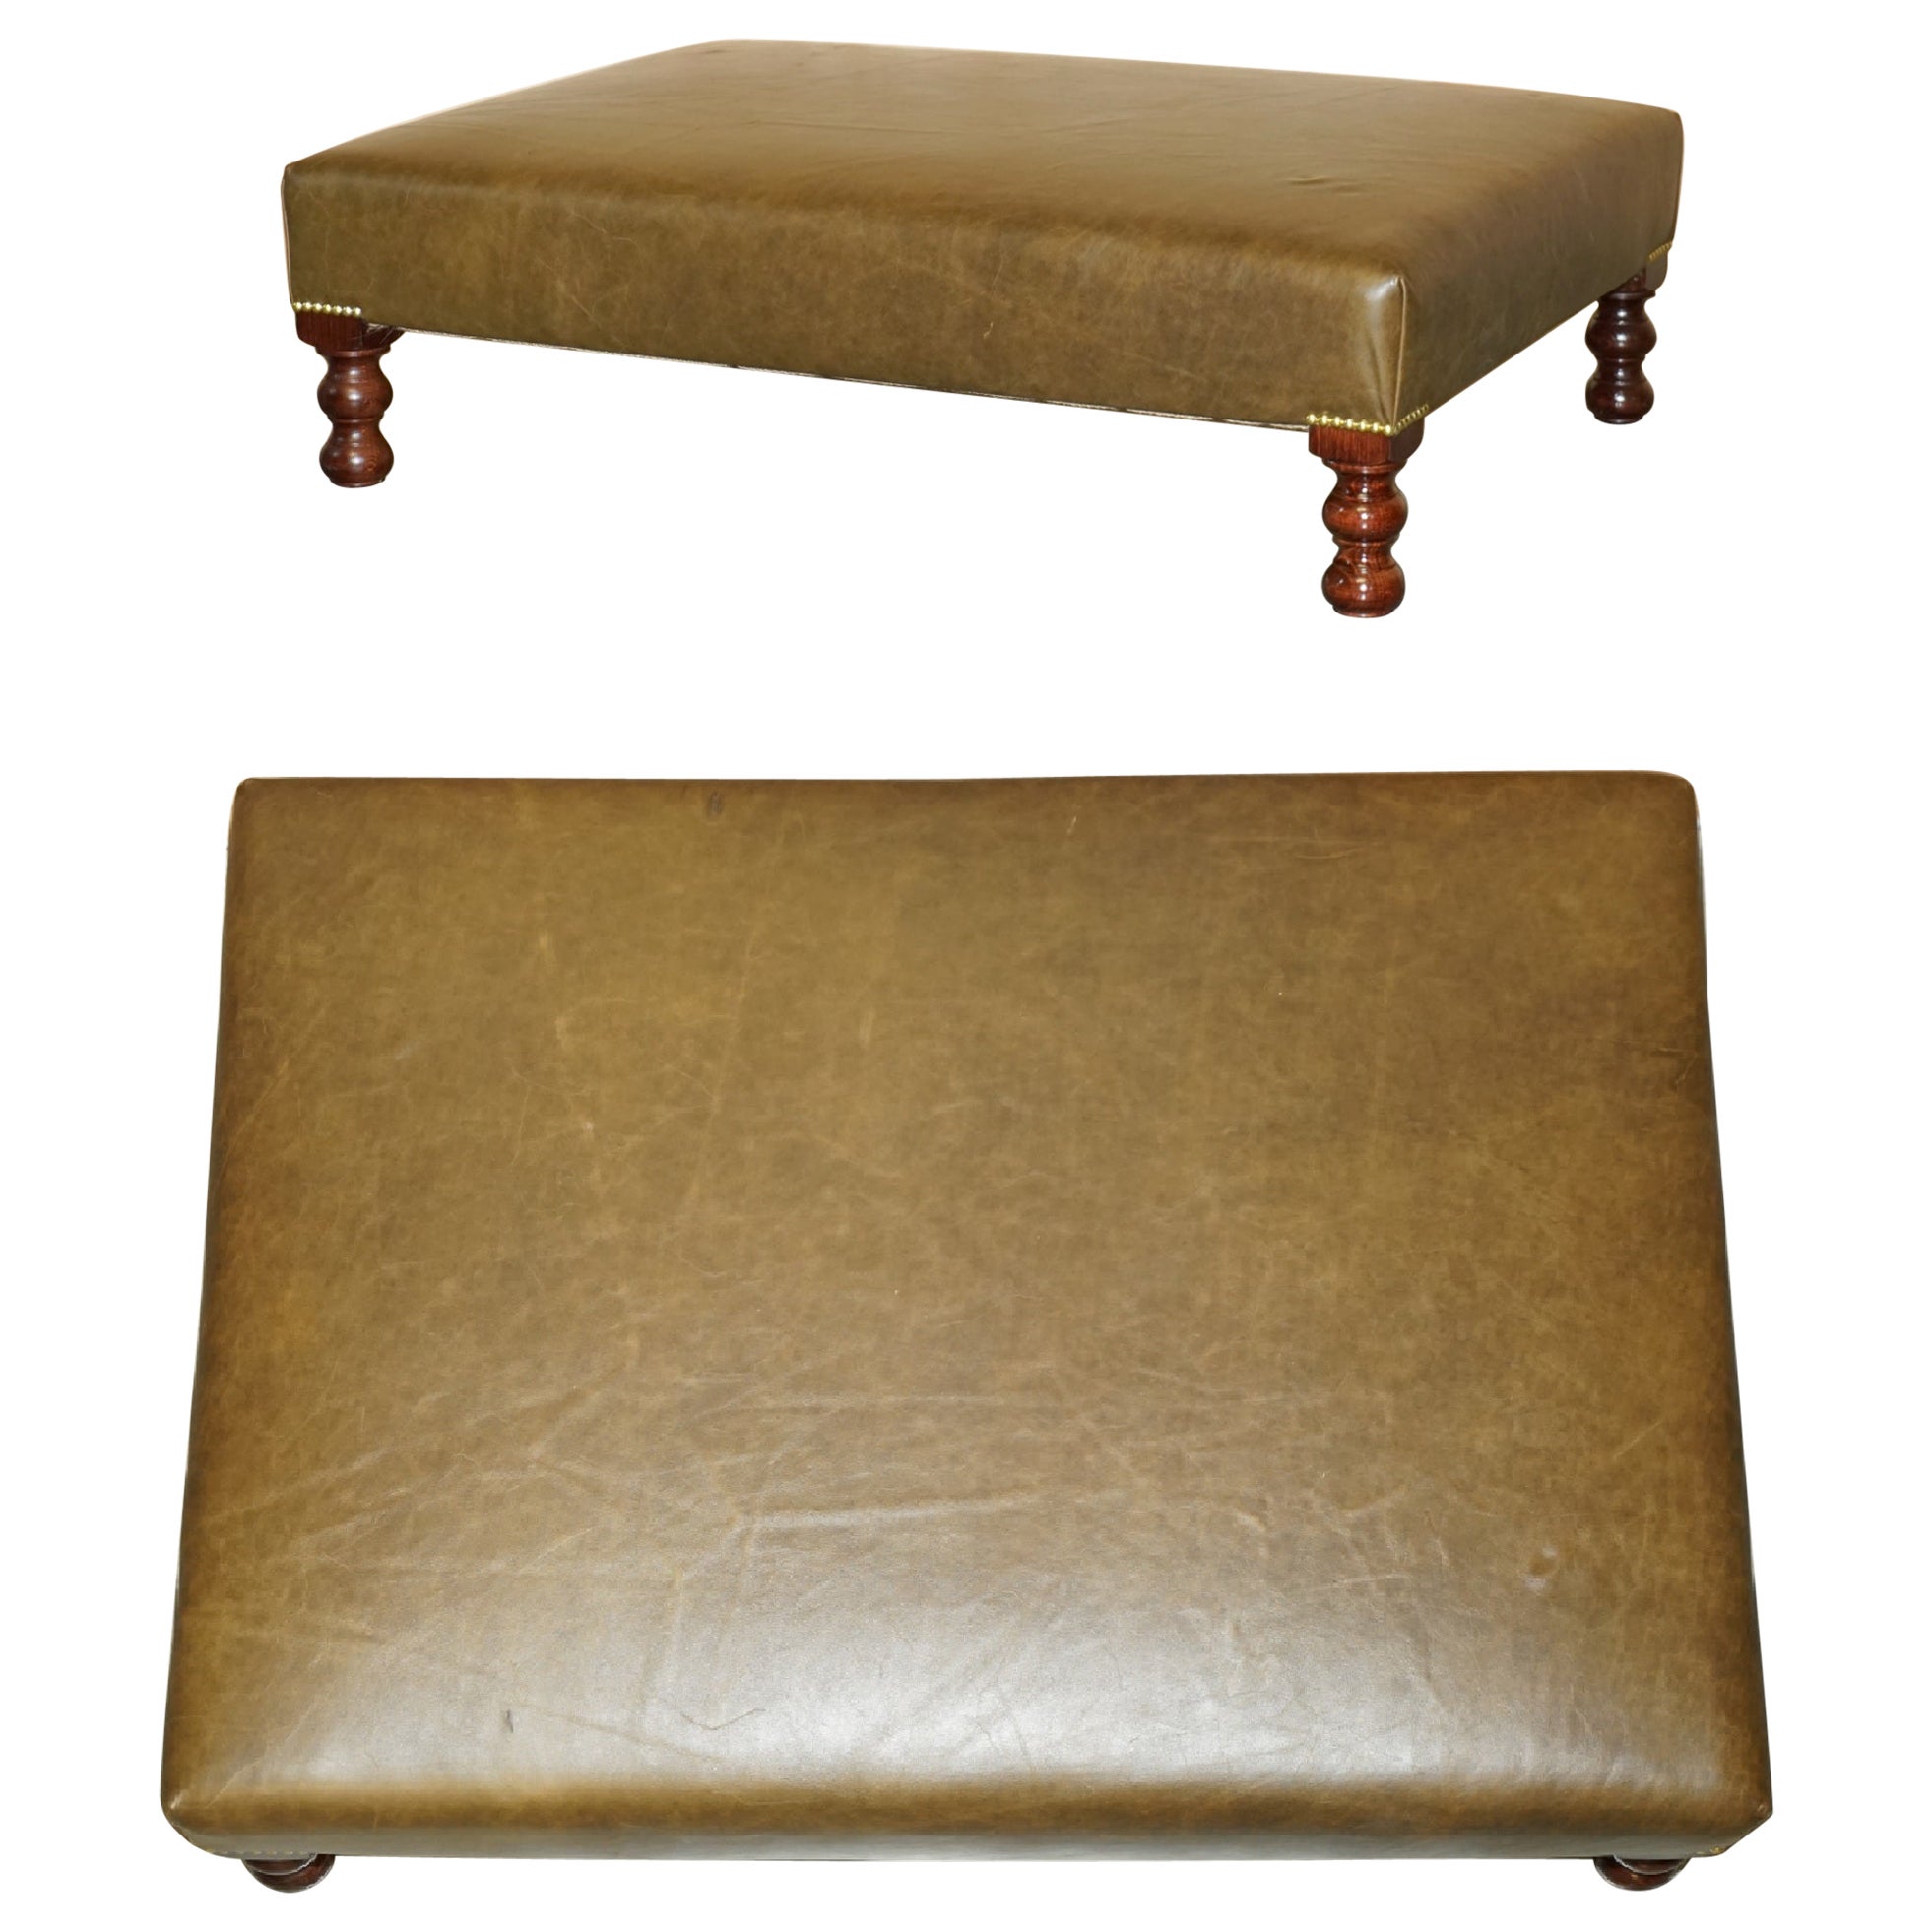 EX DISPLAY GEORGE SMiTH HERITAGE BROWN LEATHER OTTOMAN FOOTSTOOL